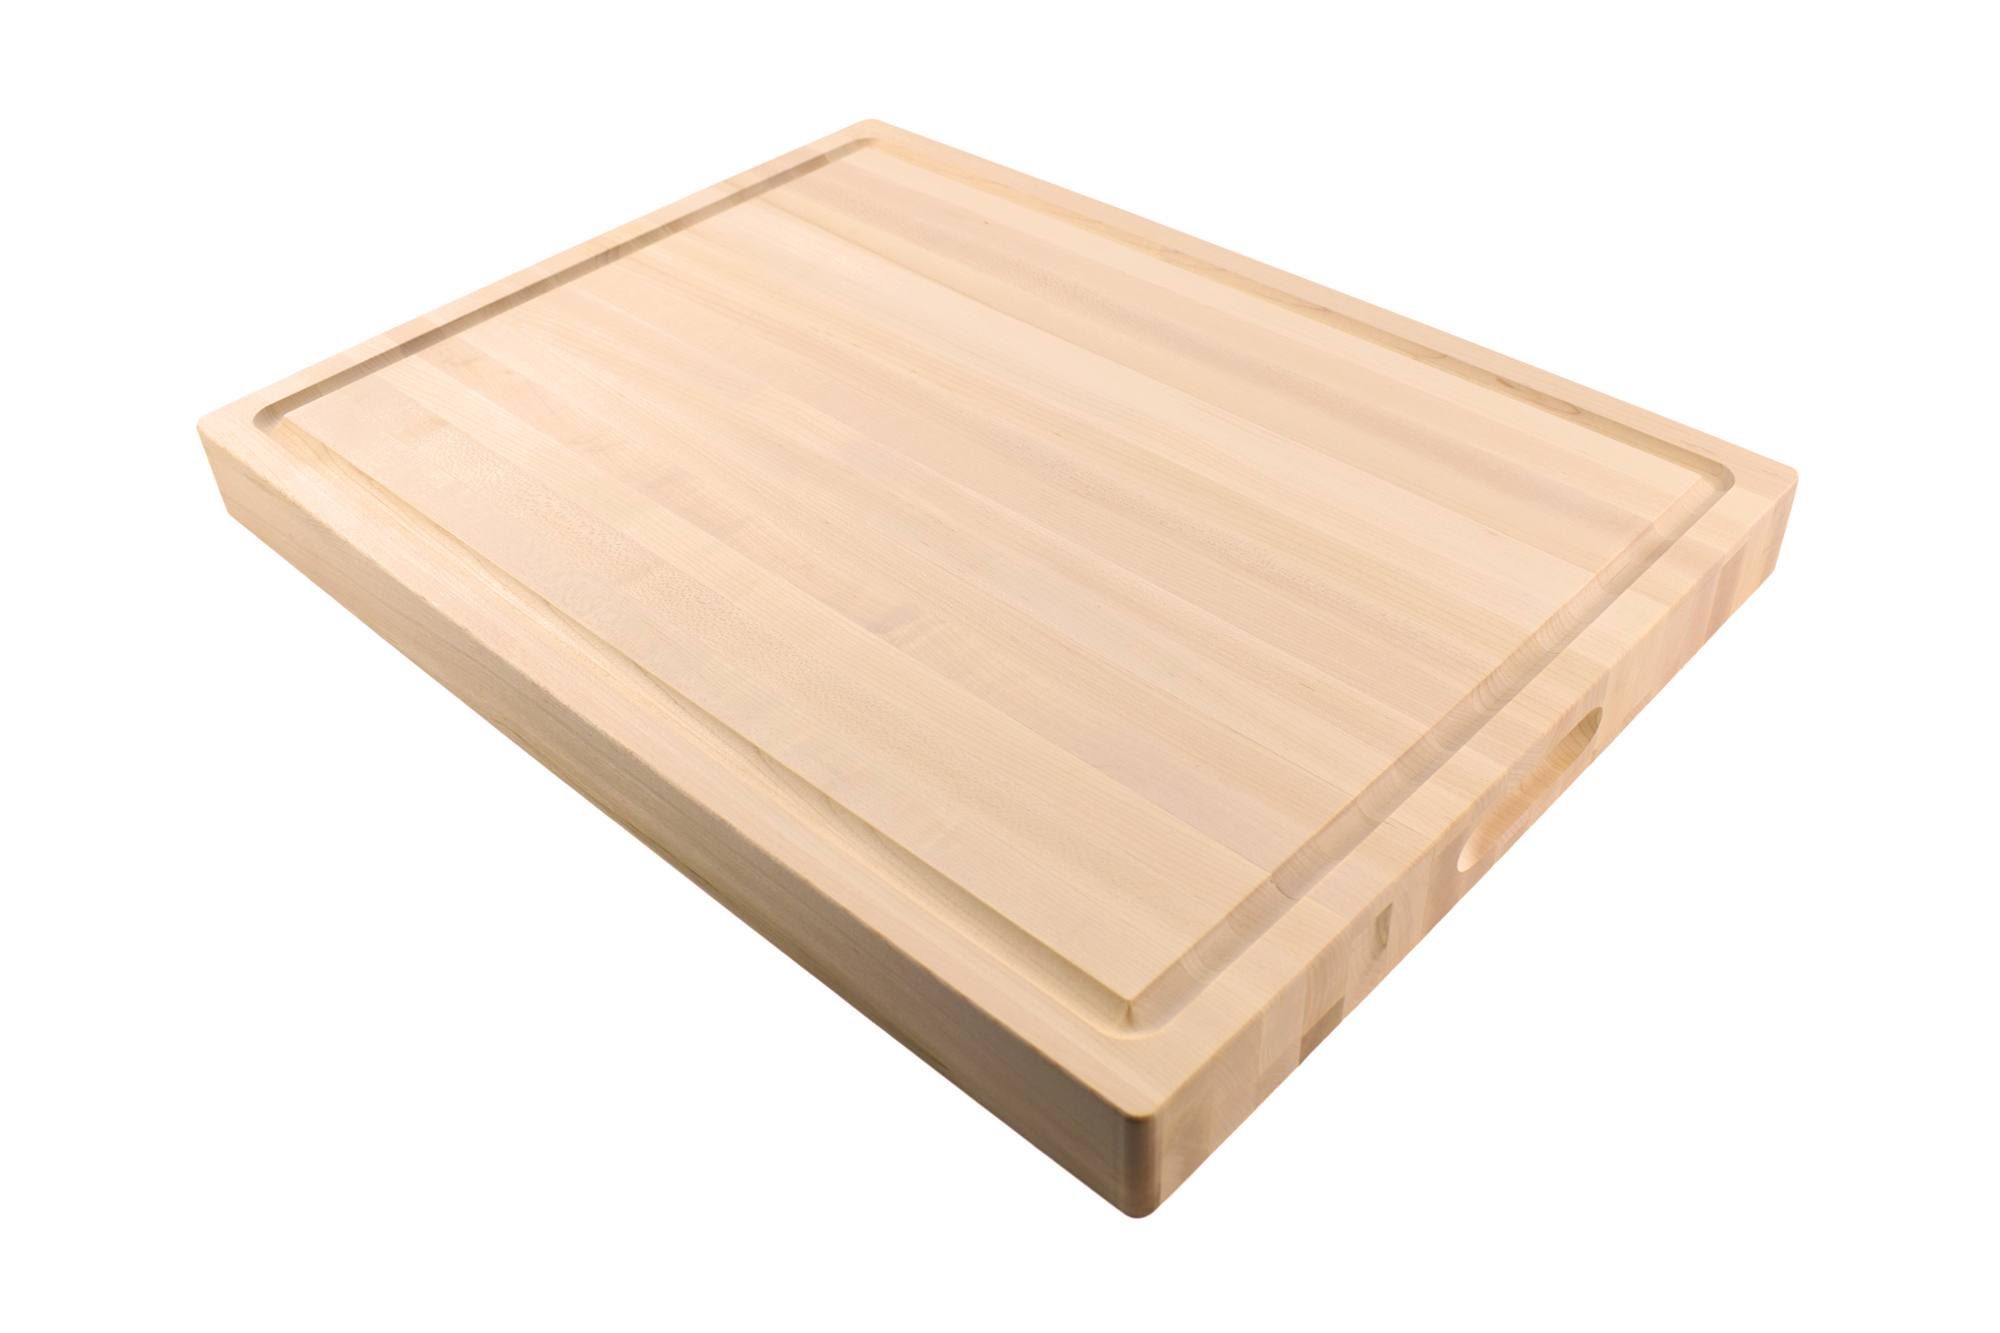 LARGE 1 3/4 INCH MAPLE BUTCHER BLOCK WITH JUICE GROOVE